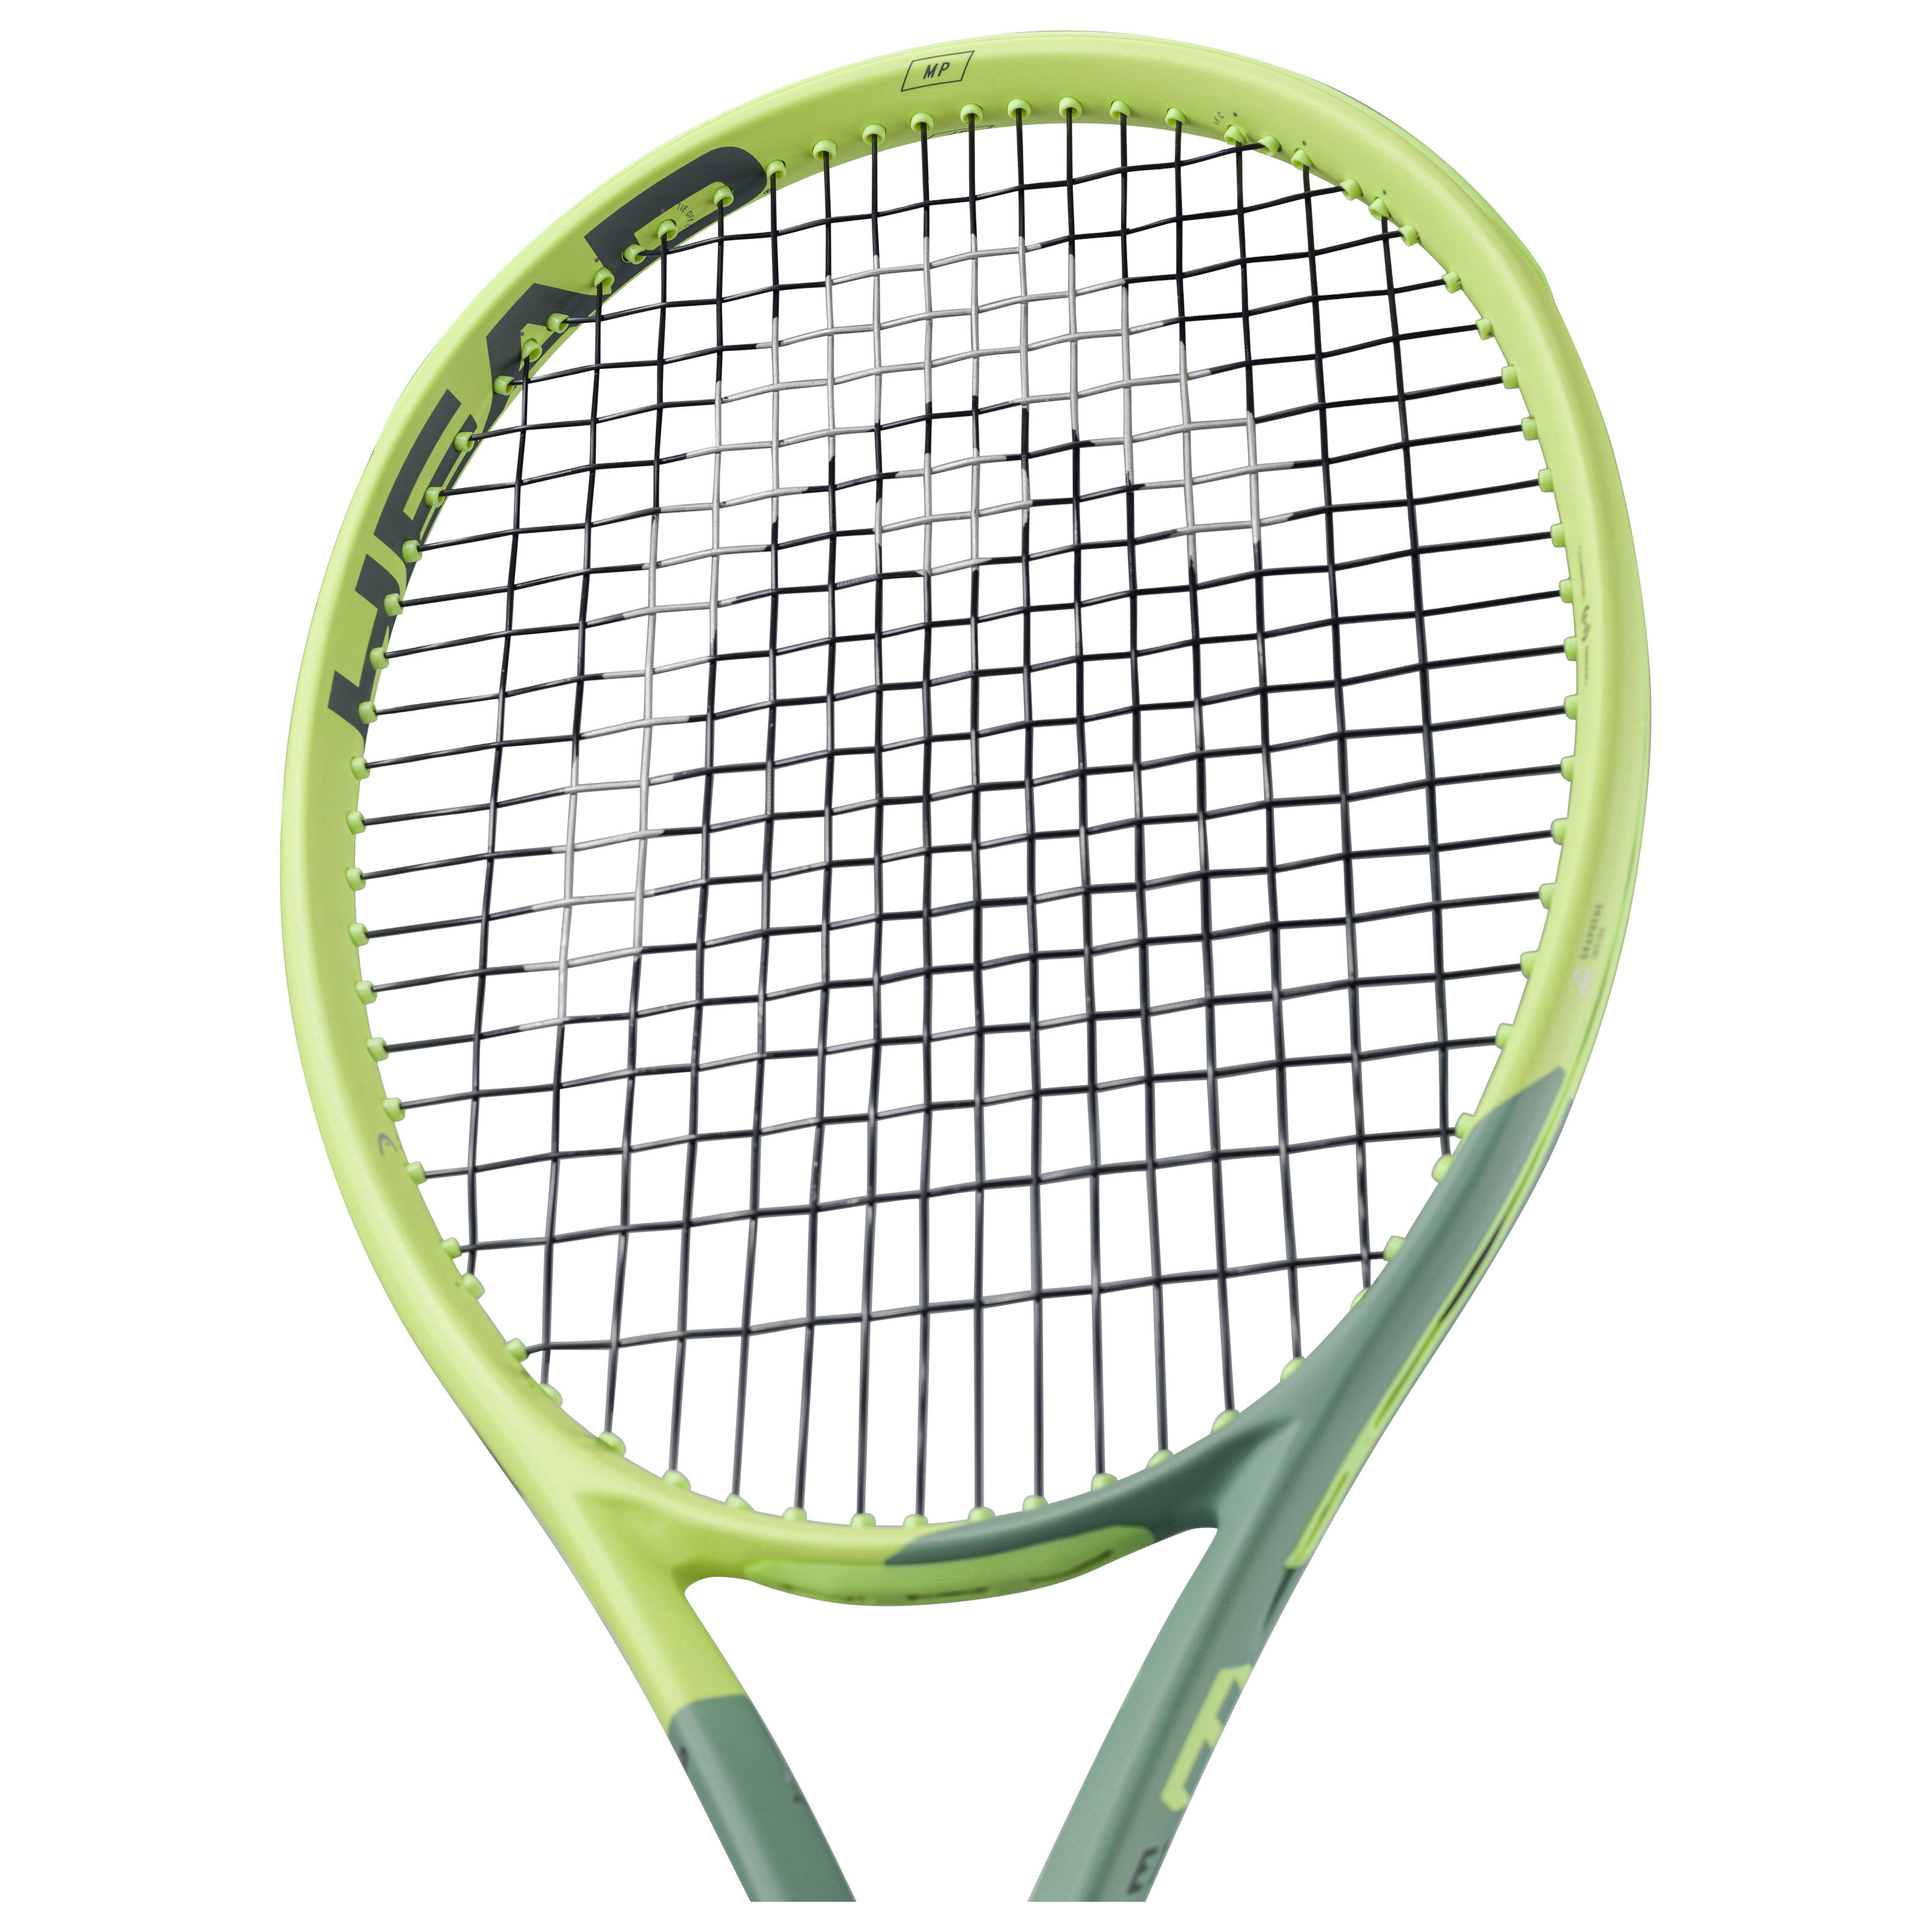 Adult Tennis Racket Auxetic Extreme MP 300 g- Grey/Yellow HEAD 